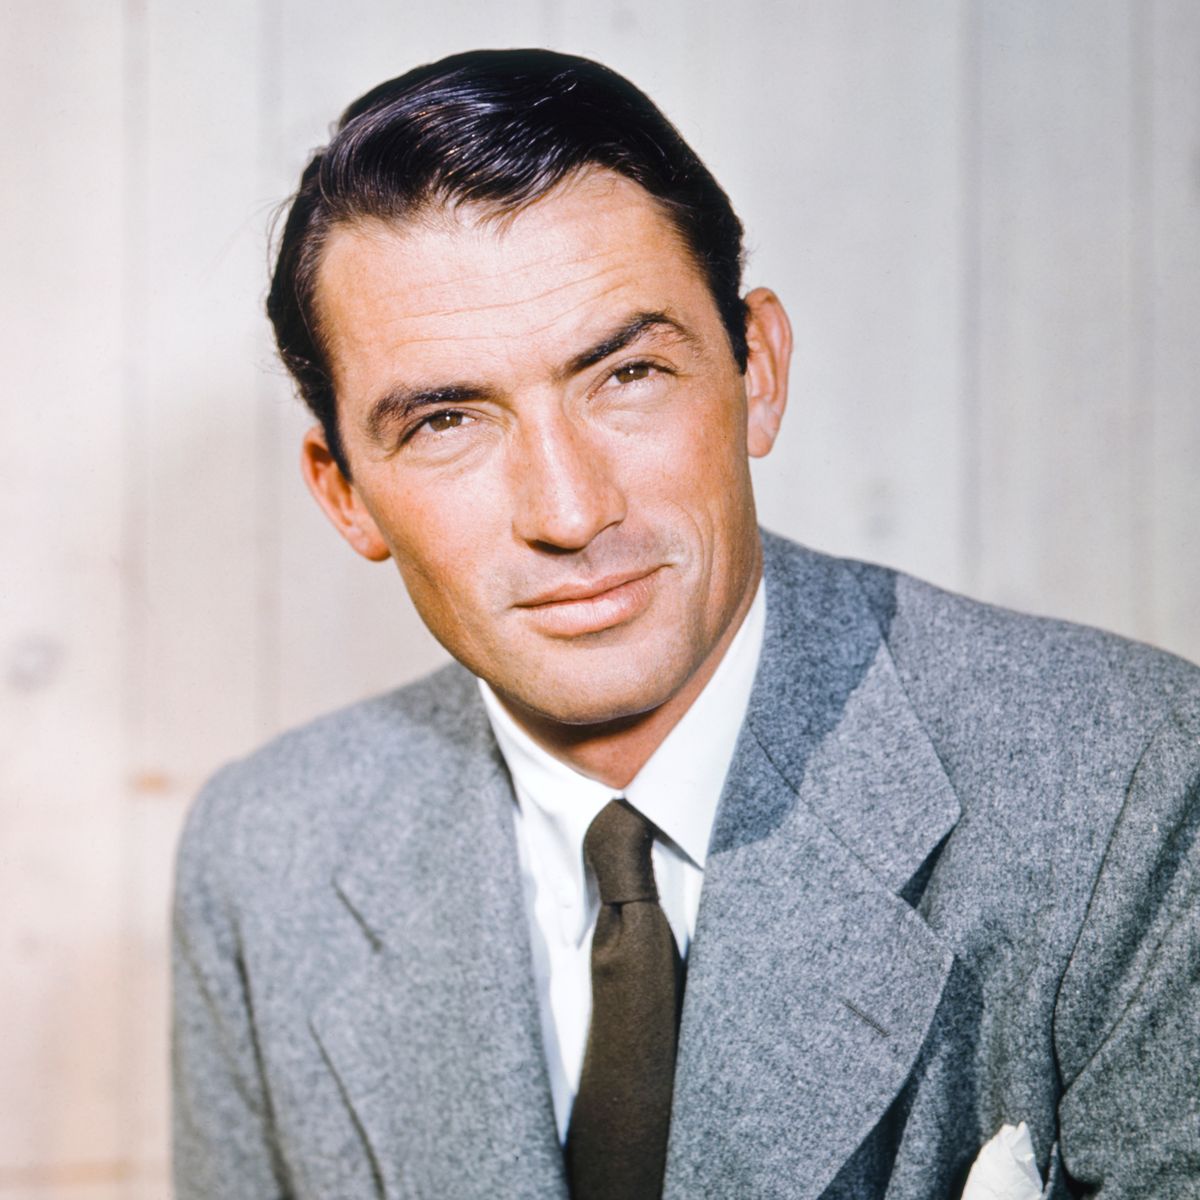 Actor Gregory Peck American actor Gregory Peck (1916 - 2003) in the 1950's. (Photo by Archive Photos/Getty Images)